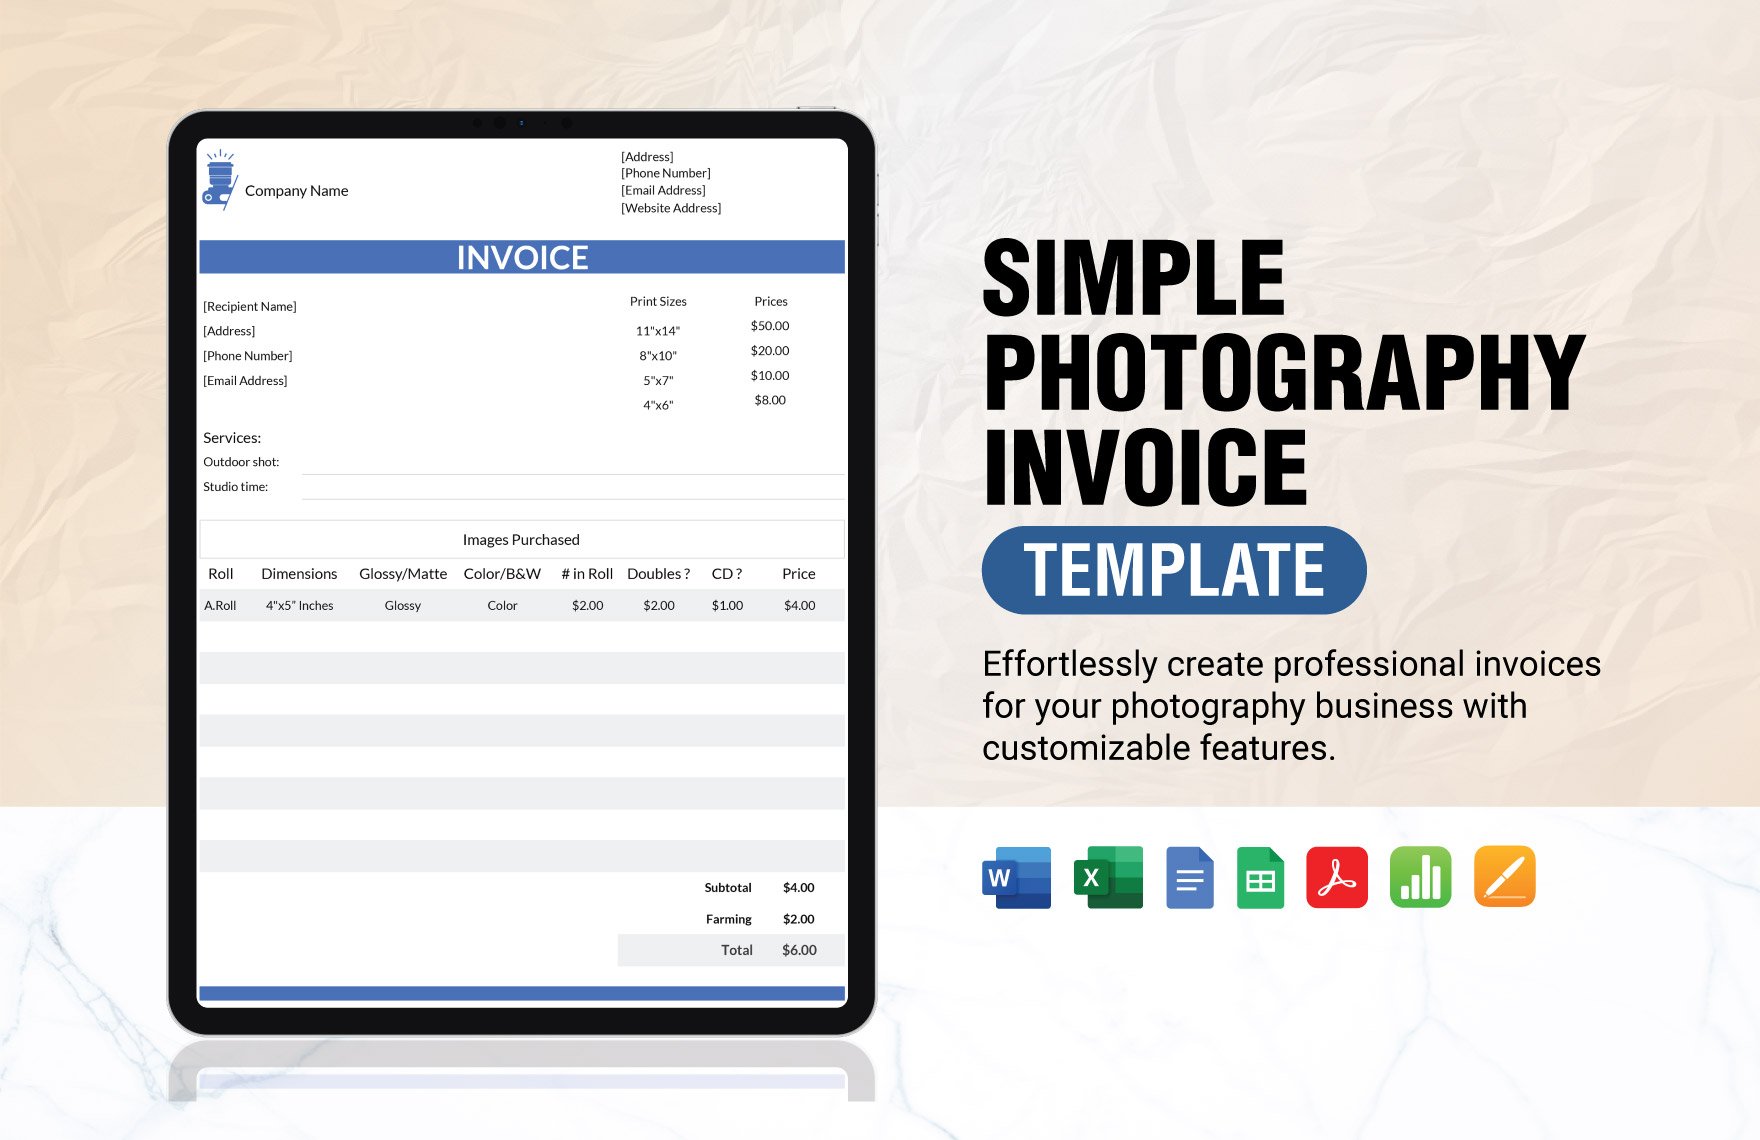 Free Simple Photography Invoice Template in Word, Google Docs, Excel, PDF, Google Sheets, Apple Pages, Apple Numbers